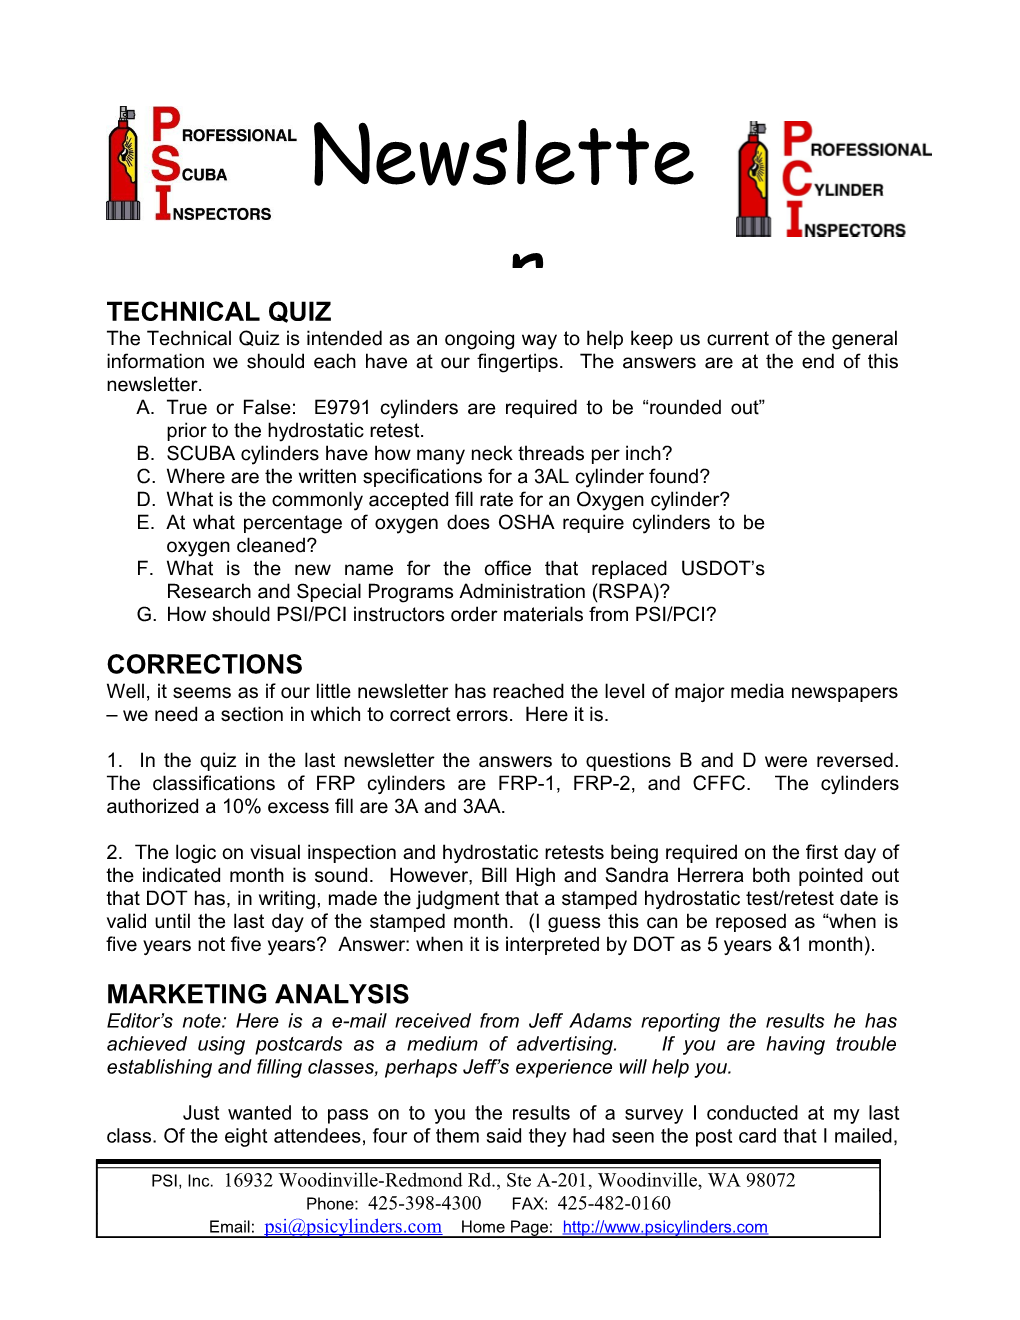 Topics for the PSI Newsletter( Dale Fox, Editor)